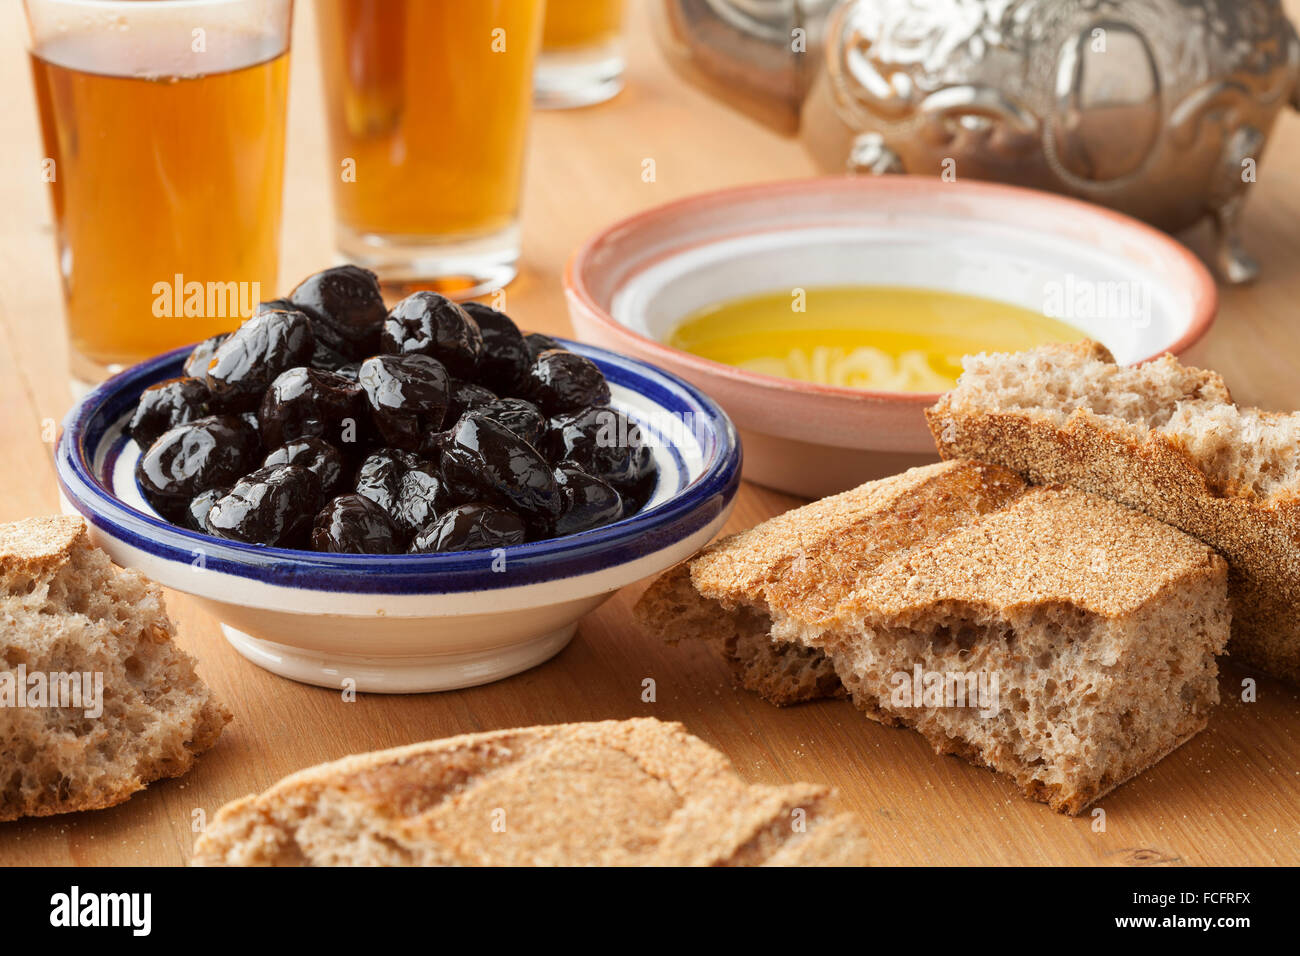 Moroccan traditional breakfast with olive oil,black olives,bread and tea Stock Photo